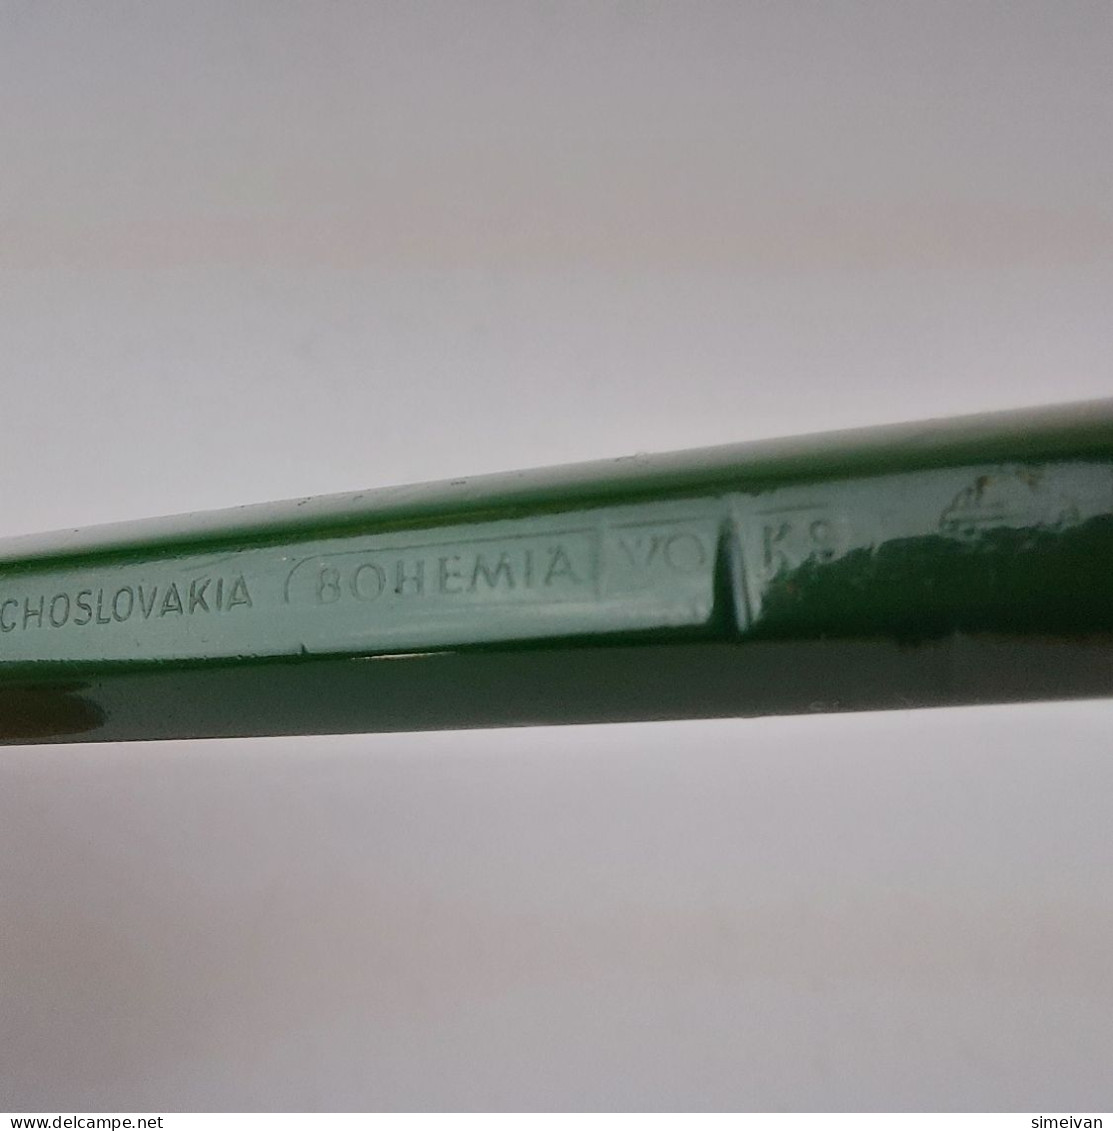 Vintage Mechanical Pencil TOISON D'OR COLORAMA 5217:3 Bohemia Works Green #5492